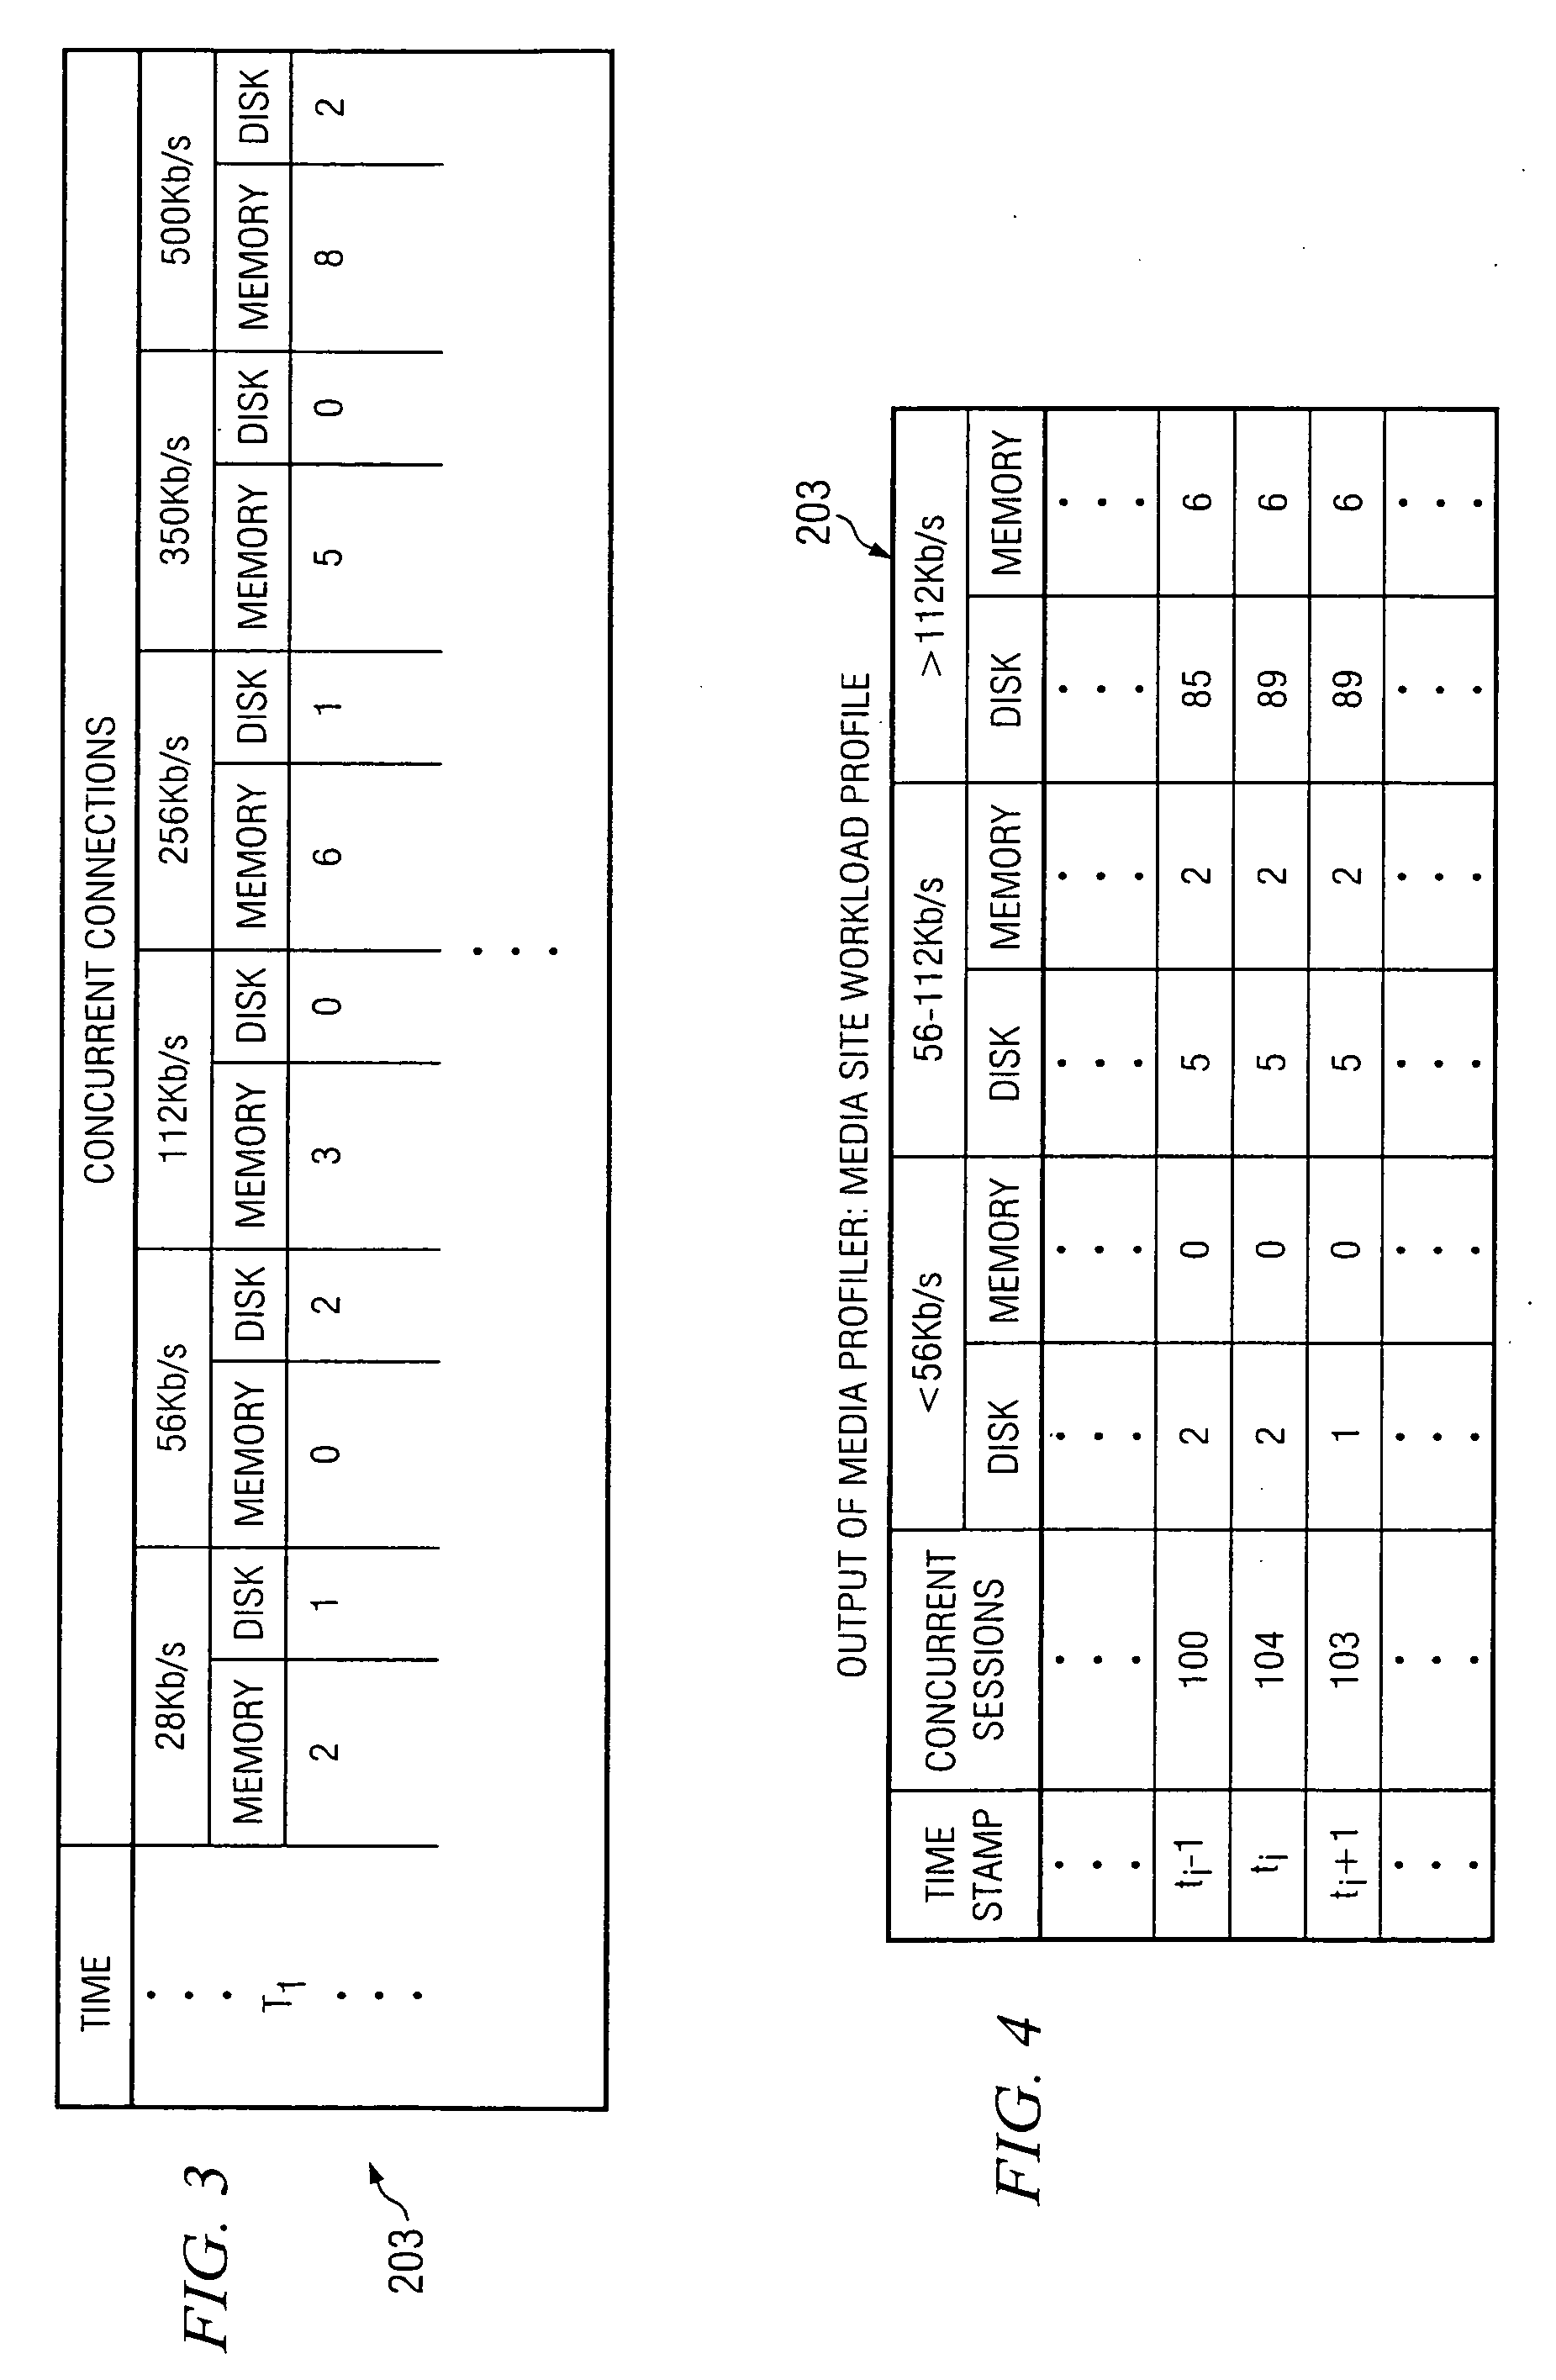 System and method for evaluating capacity of a heterogeneous media server configuration for supporting an expected workload